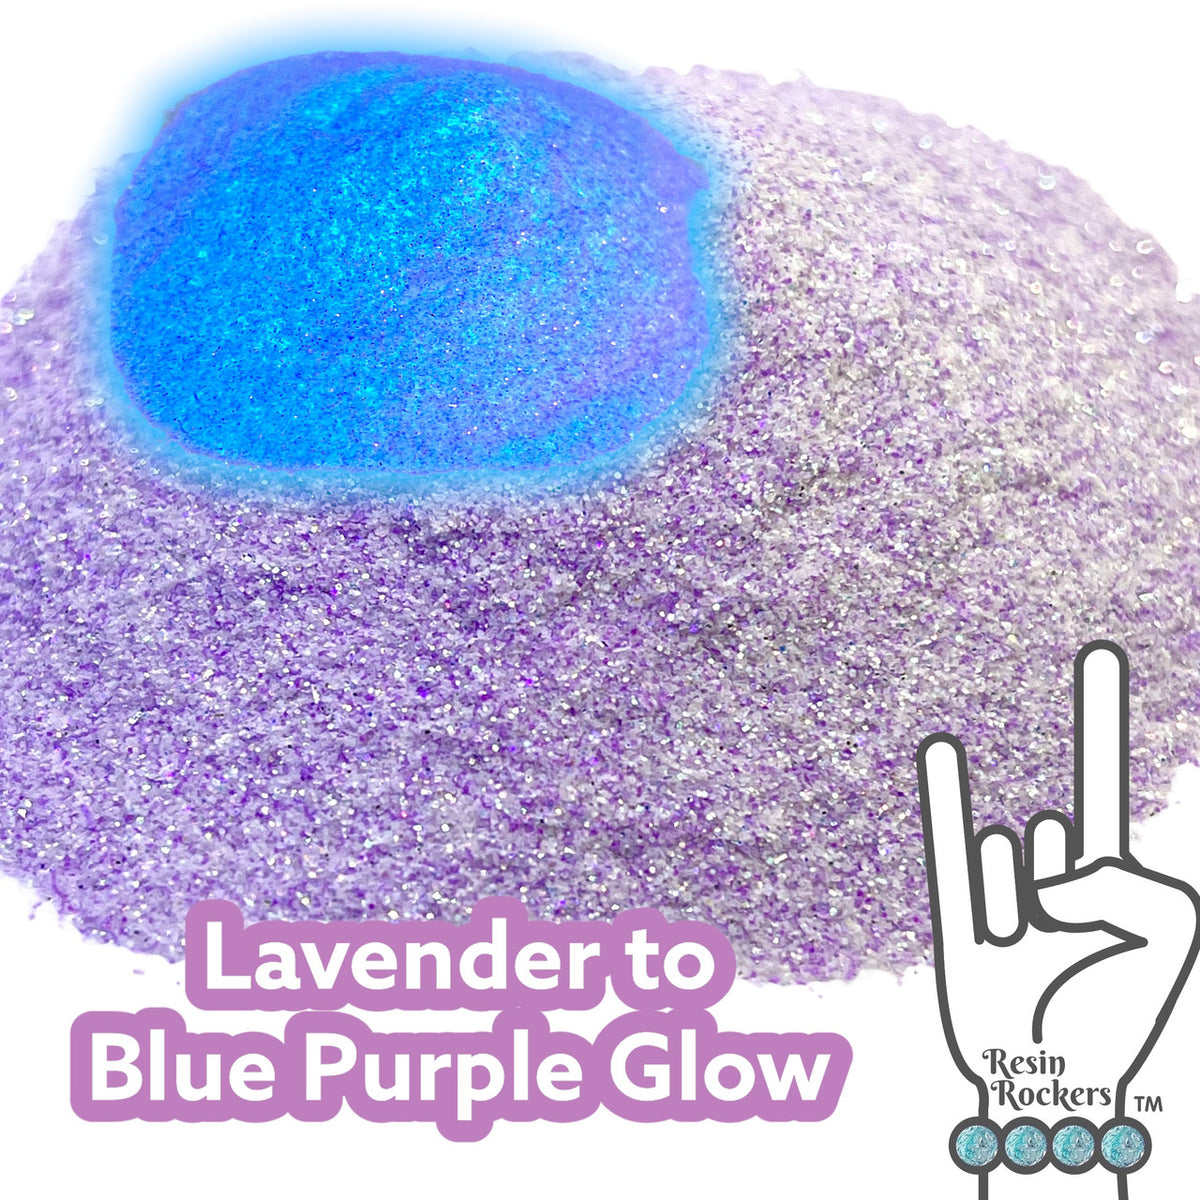 Glamour and Glow Lavender to Blue Purple Glow in the Dark Pixie for Poxy Color Changing Microfine Glitter